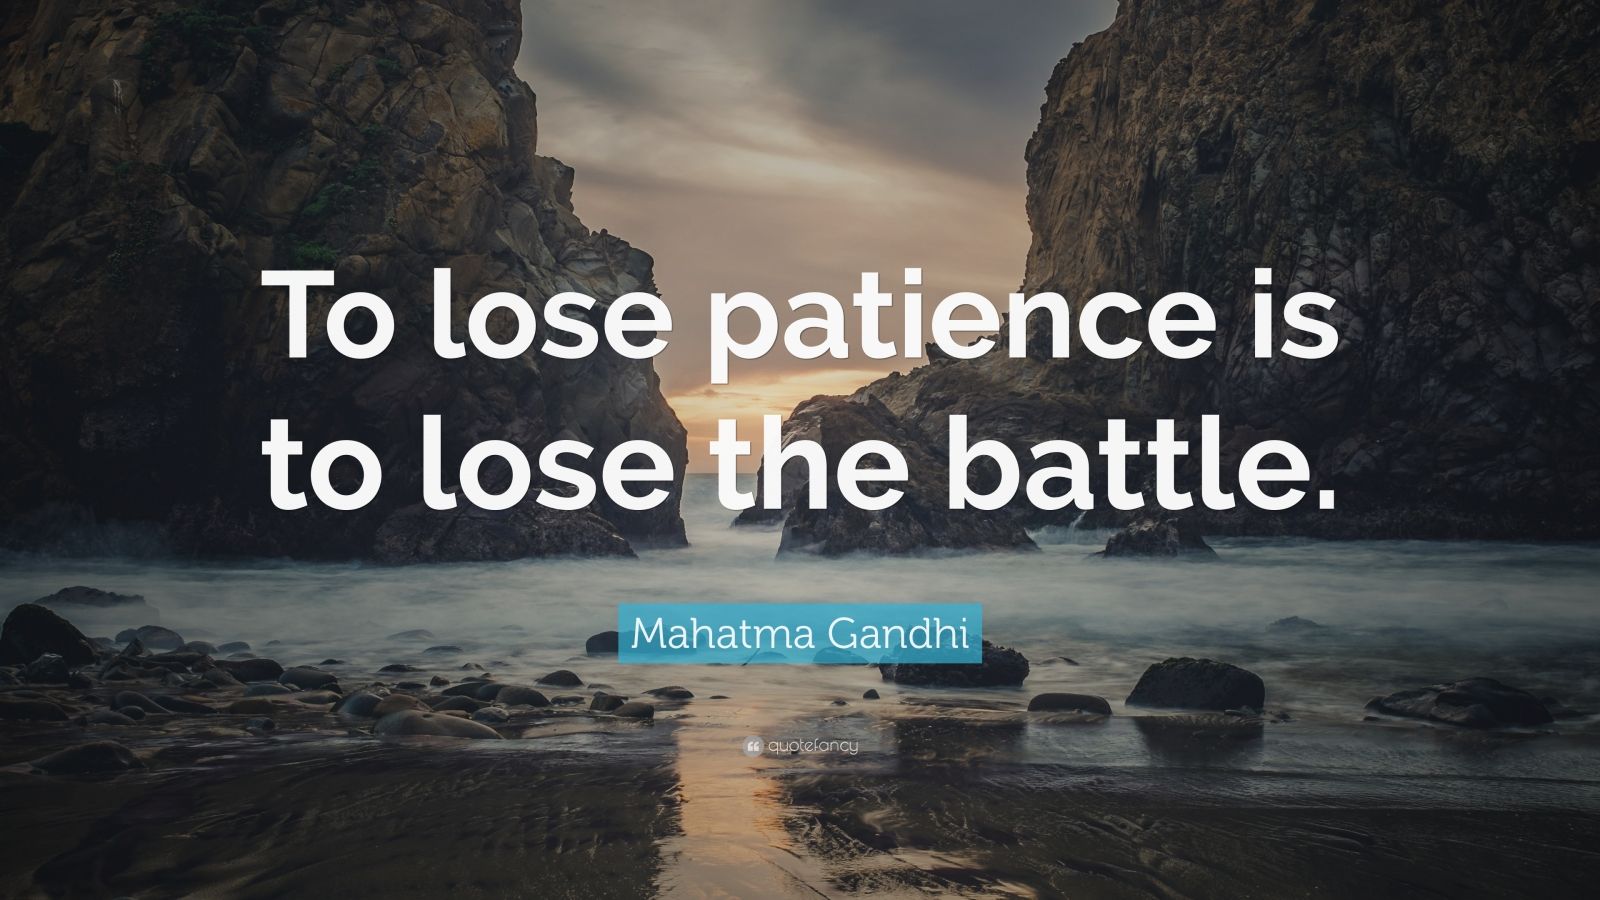 Mahatma Gandhi Quote: “To lose patience is to lose the battle.” (12 ...